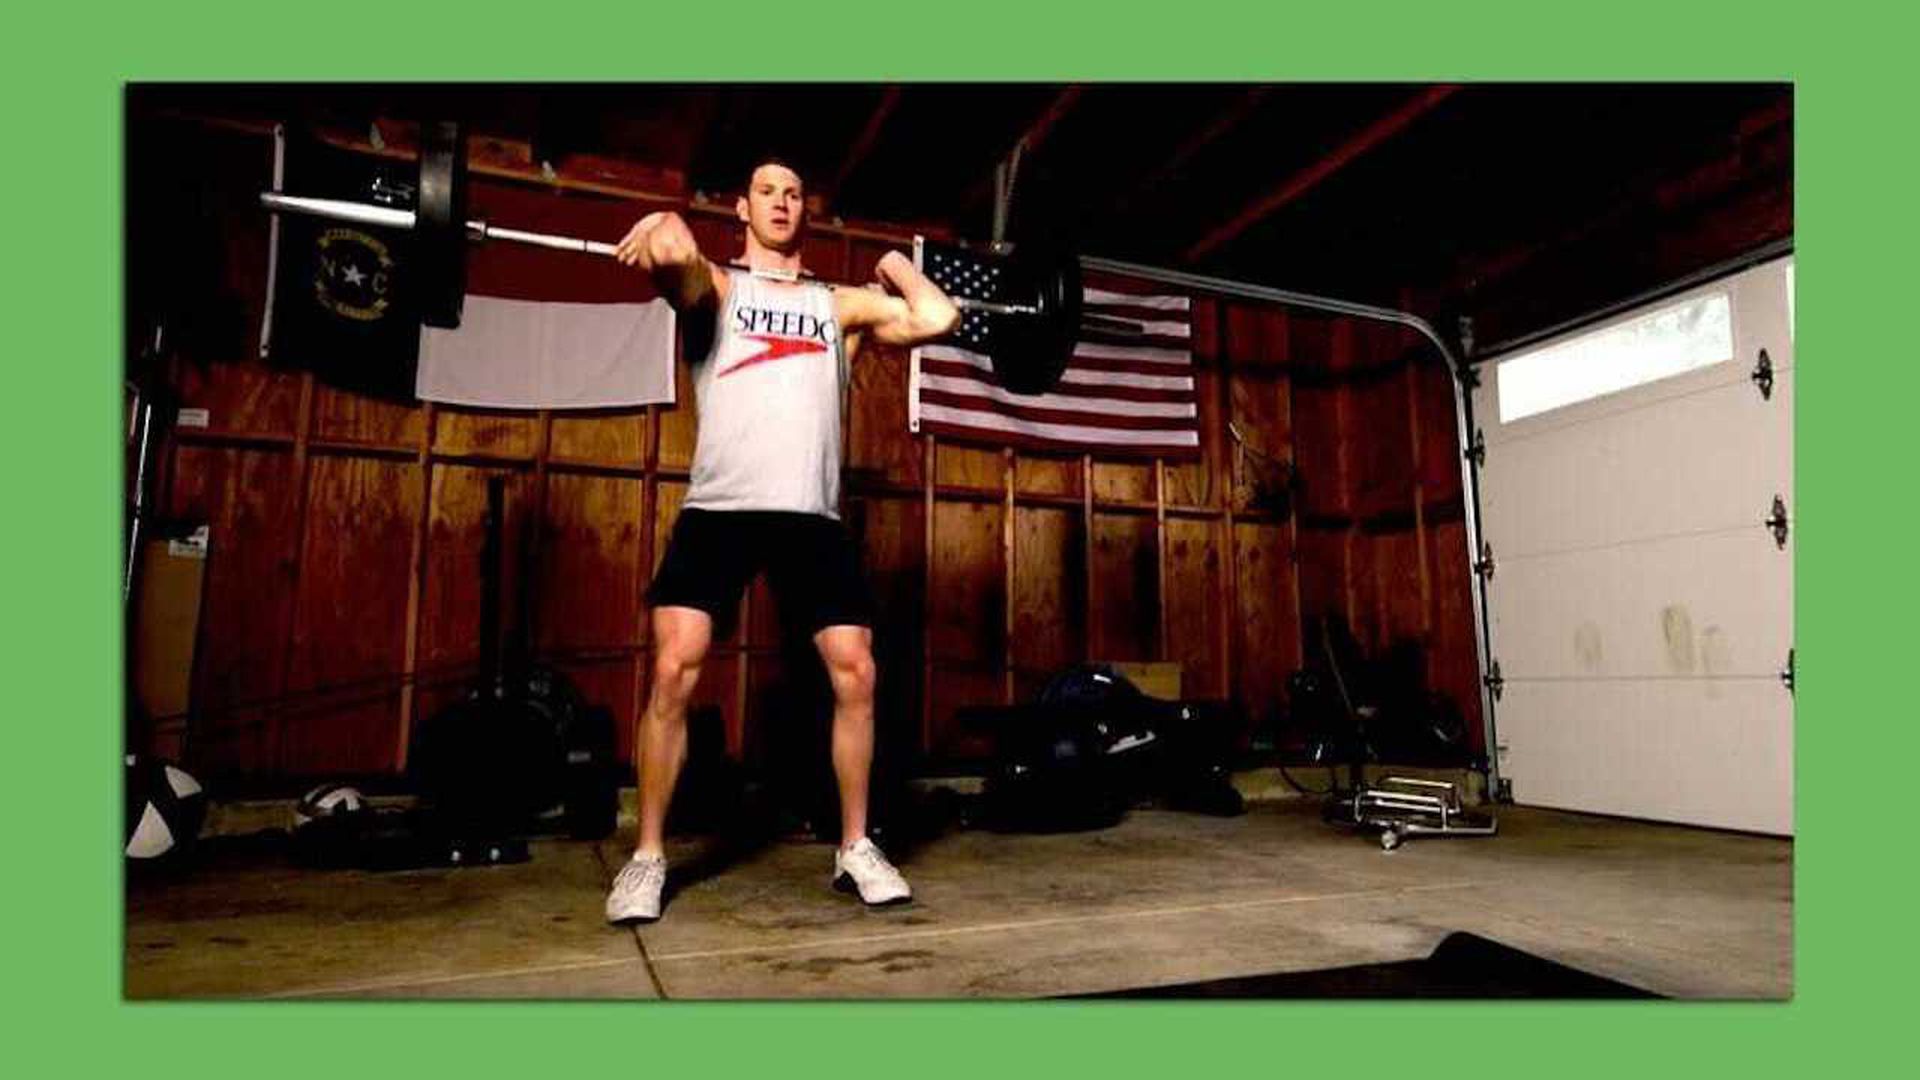 A man in a white t-shirt presses a barbell in a dark room in front of a wooden wall with flags